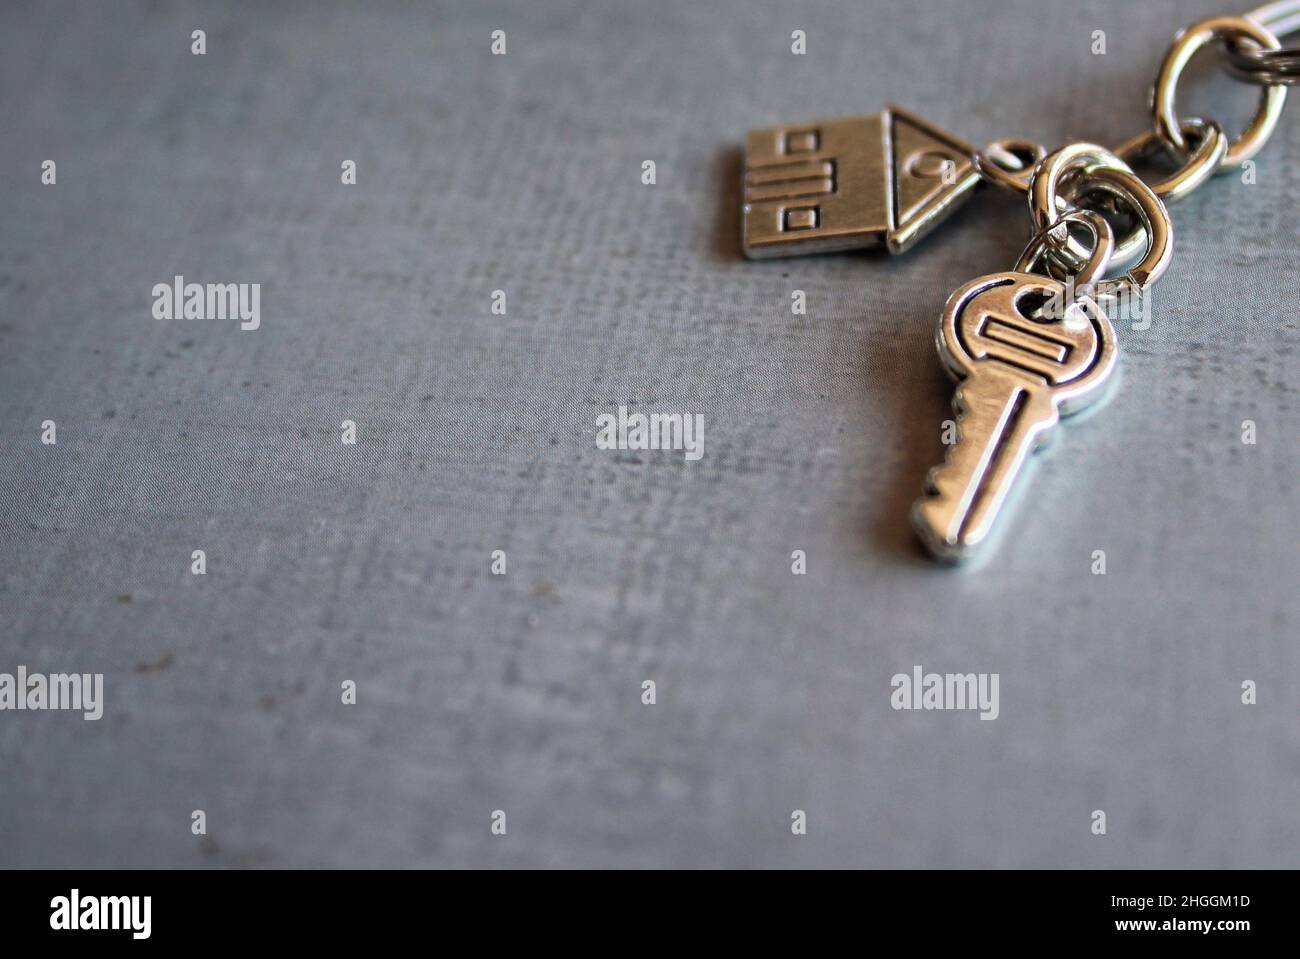 Selective focus image of house key on concrete floor with copy space for text. Home ownership concept. Stock Photo